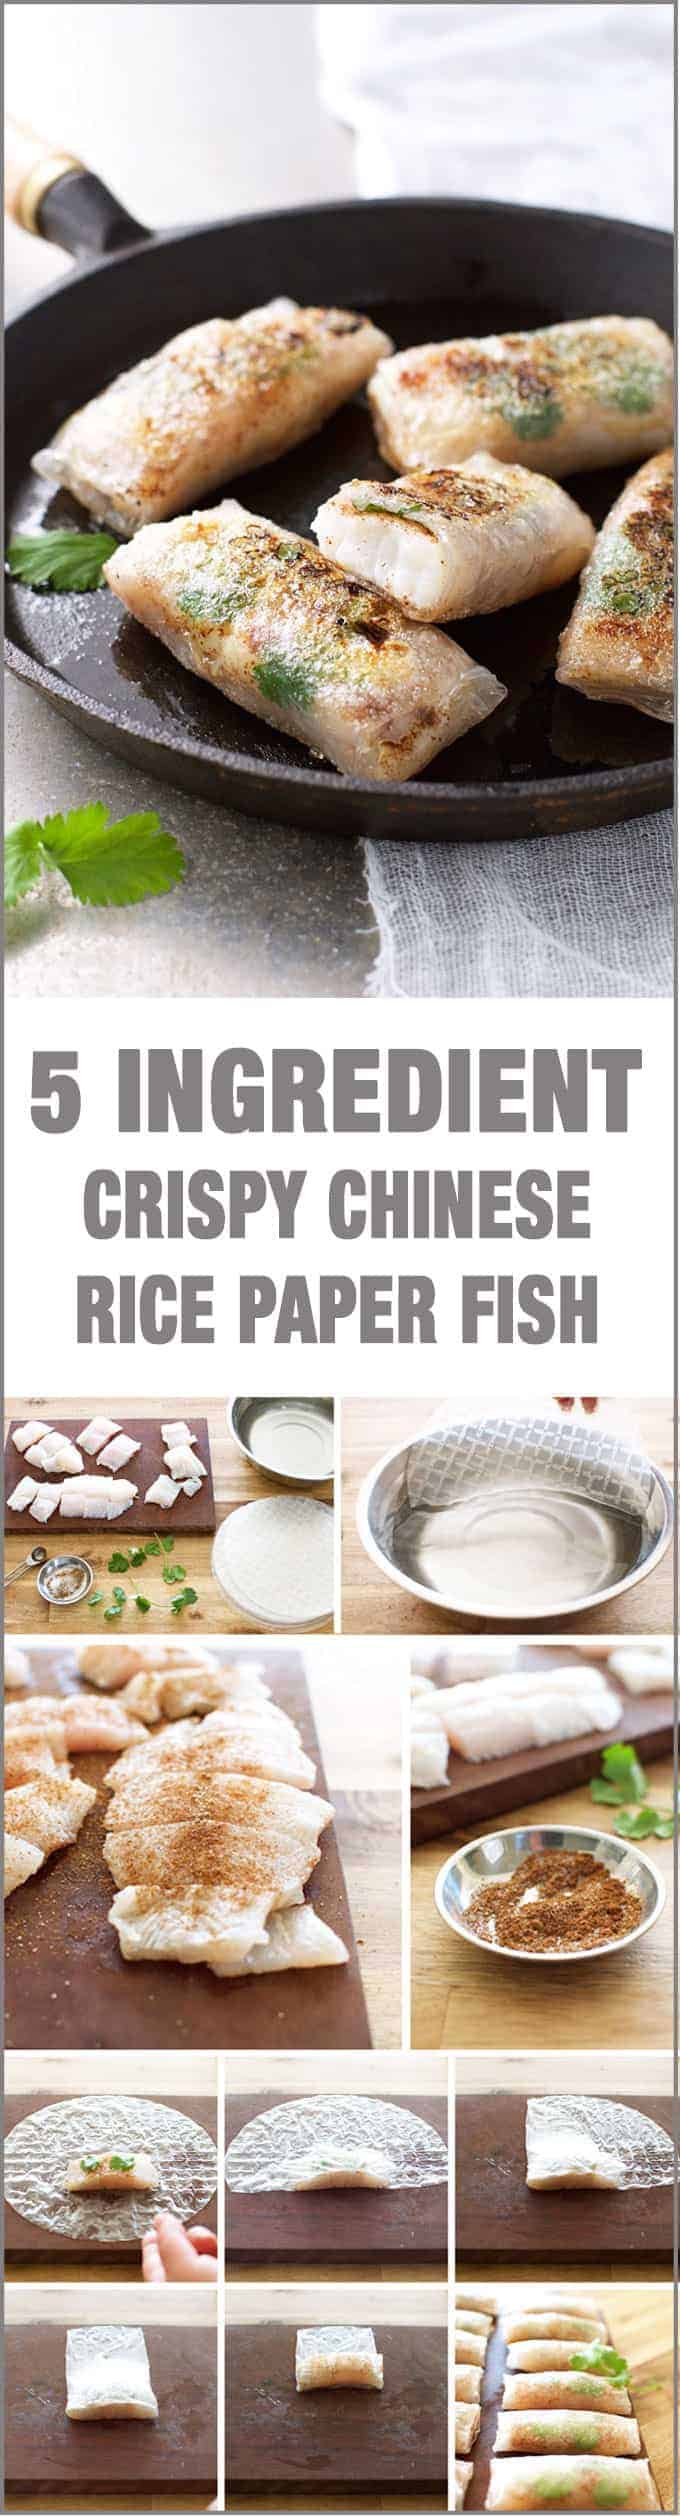 Crispy Chinese Rice Paper Wrapped Fish - just 5 ingredients, what a way to get your fish fix!